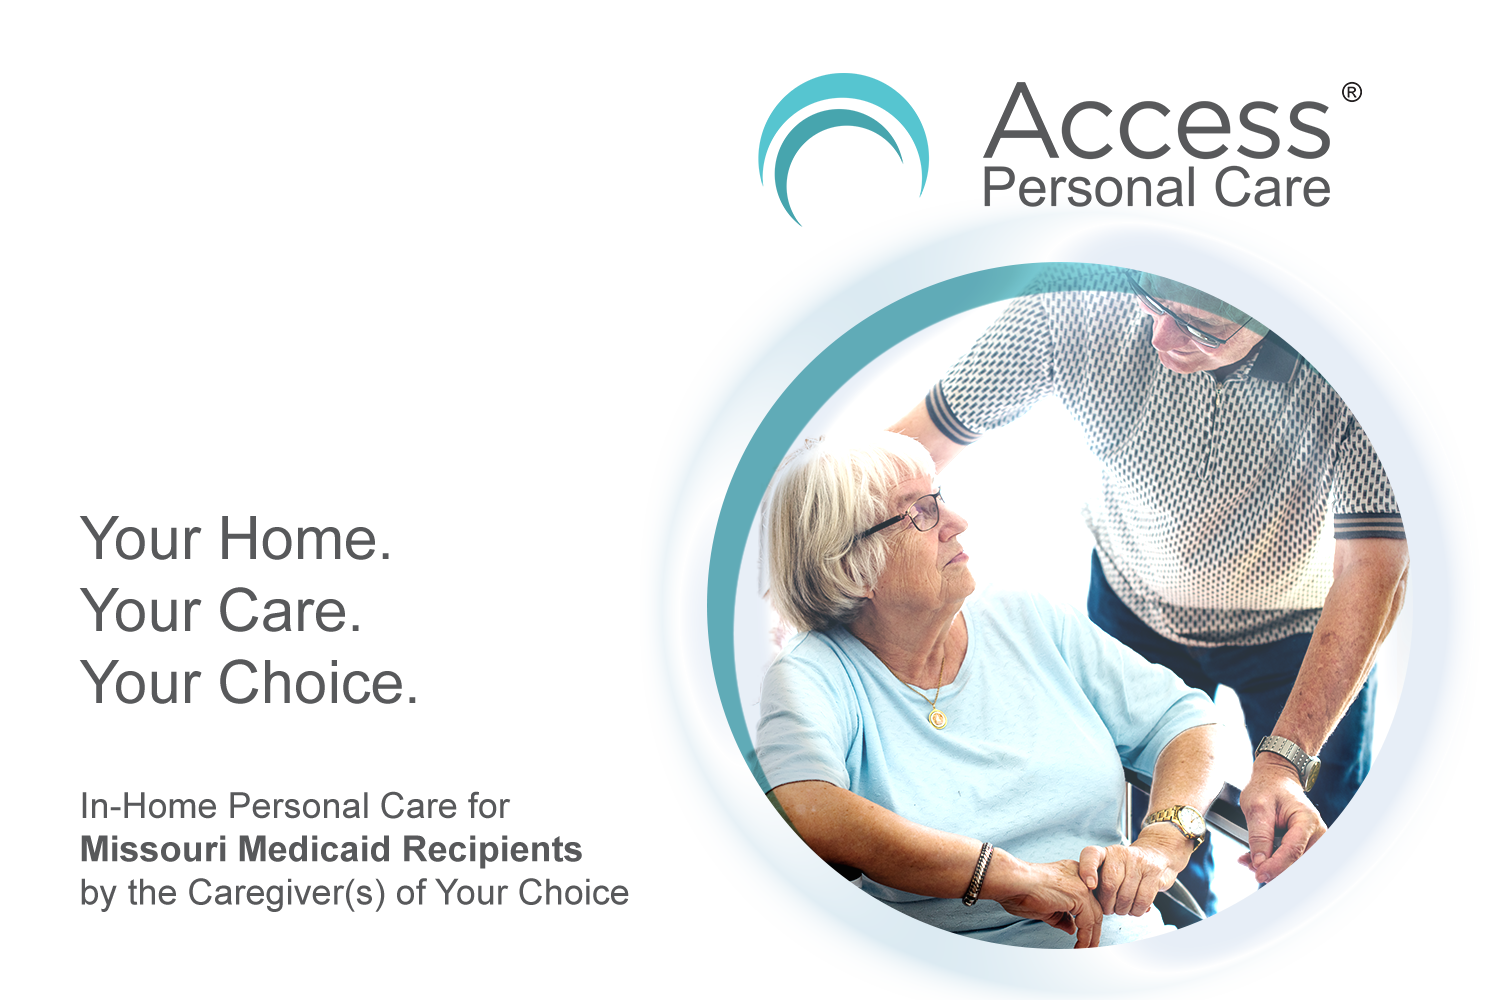 Your Home. Your Care. Your Choice. In-Home Personal Care for Missouri Medicaid Recipients by the Caregiver(s) of your choice.